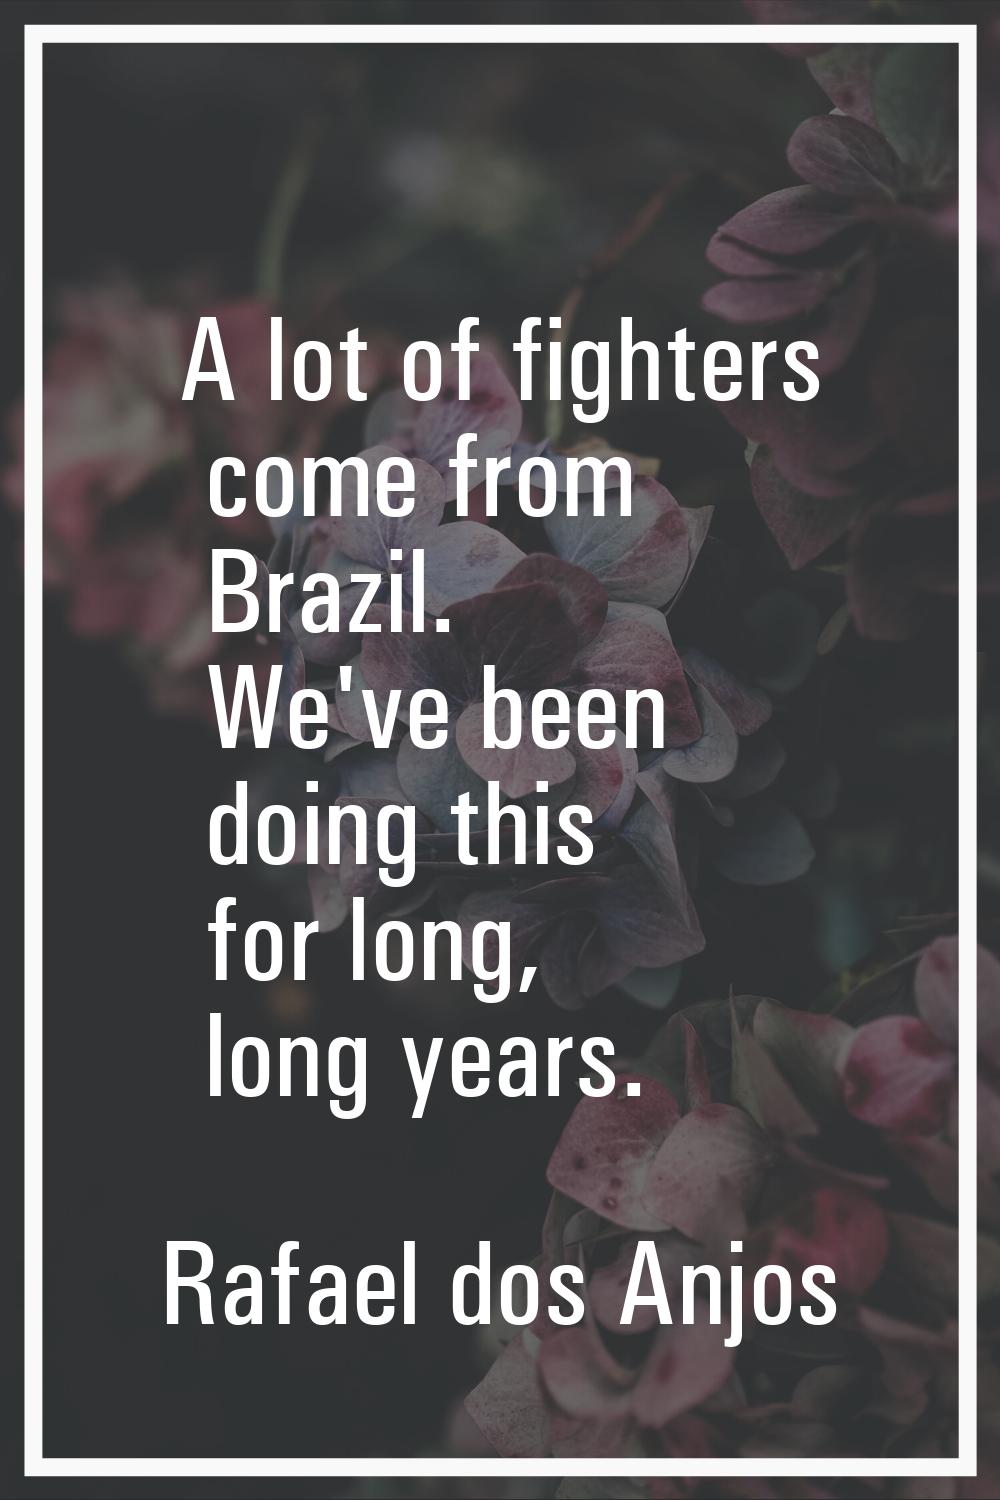 A lot of fighters come from Brazil. We've been doing this for long, long years.